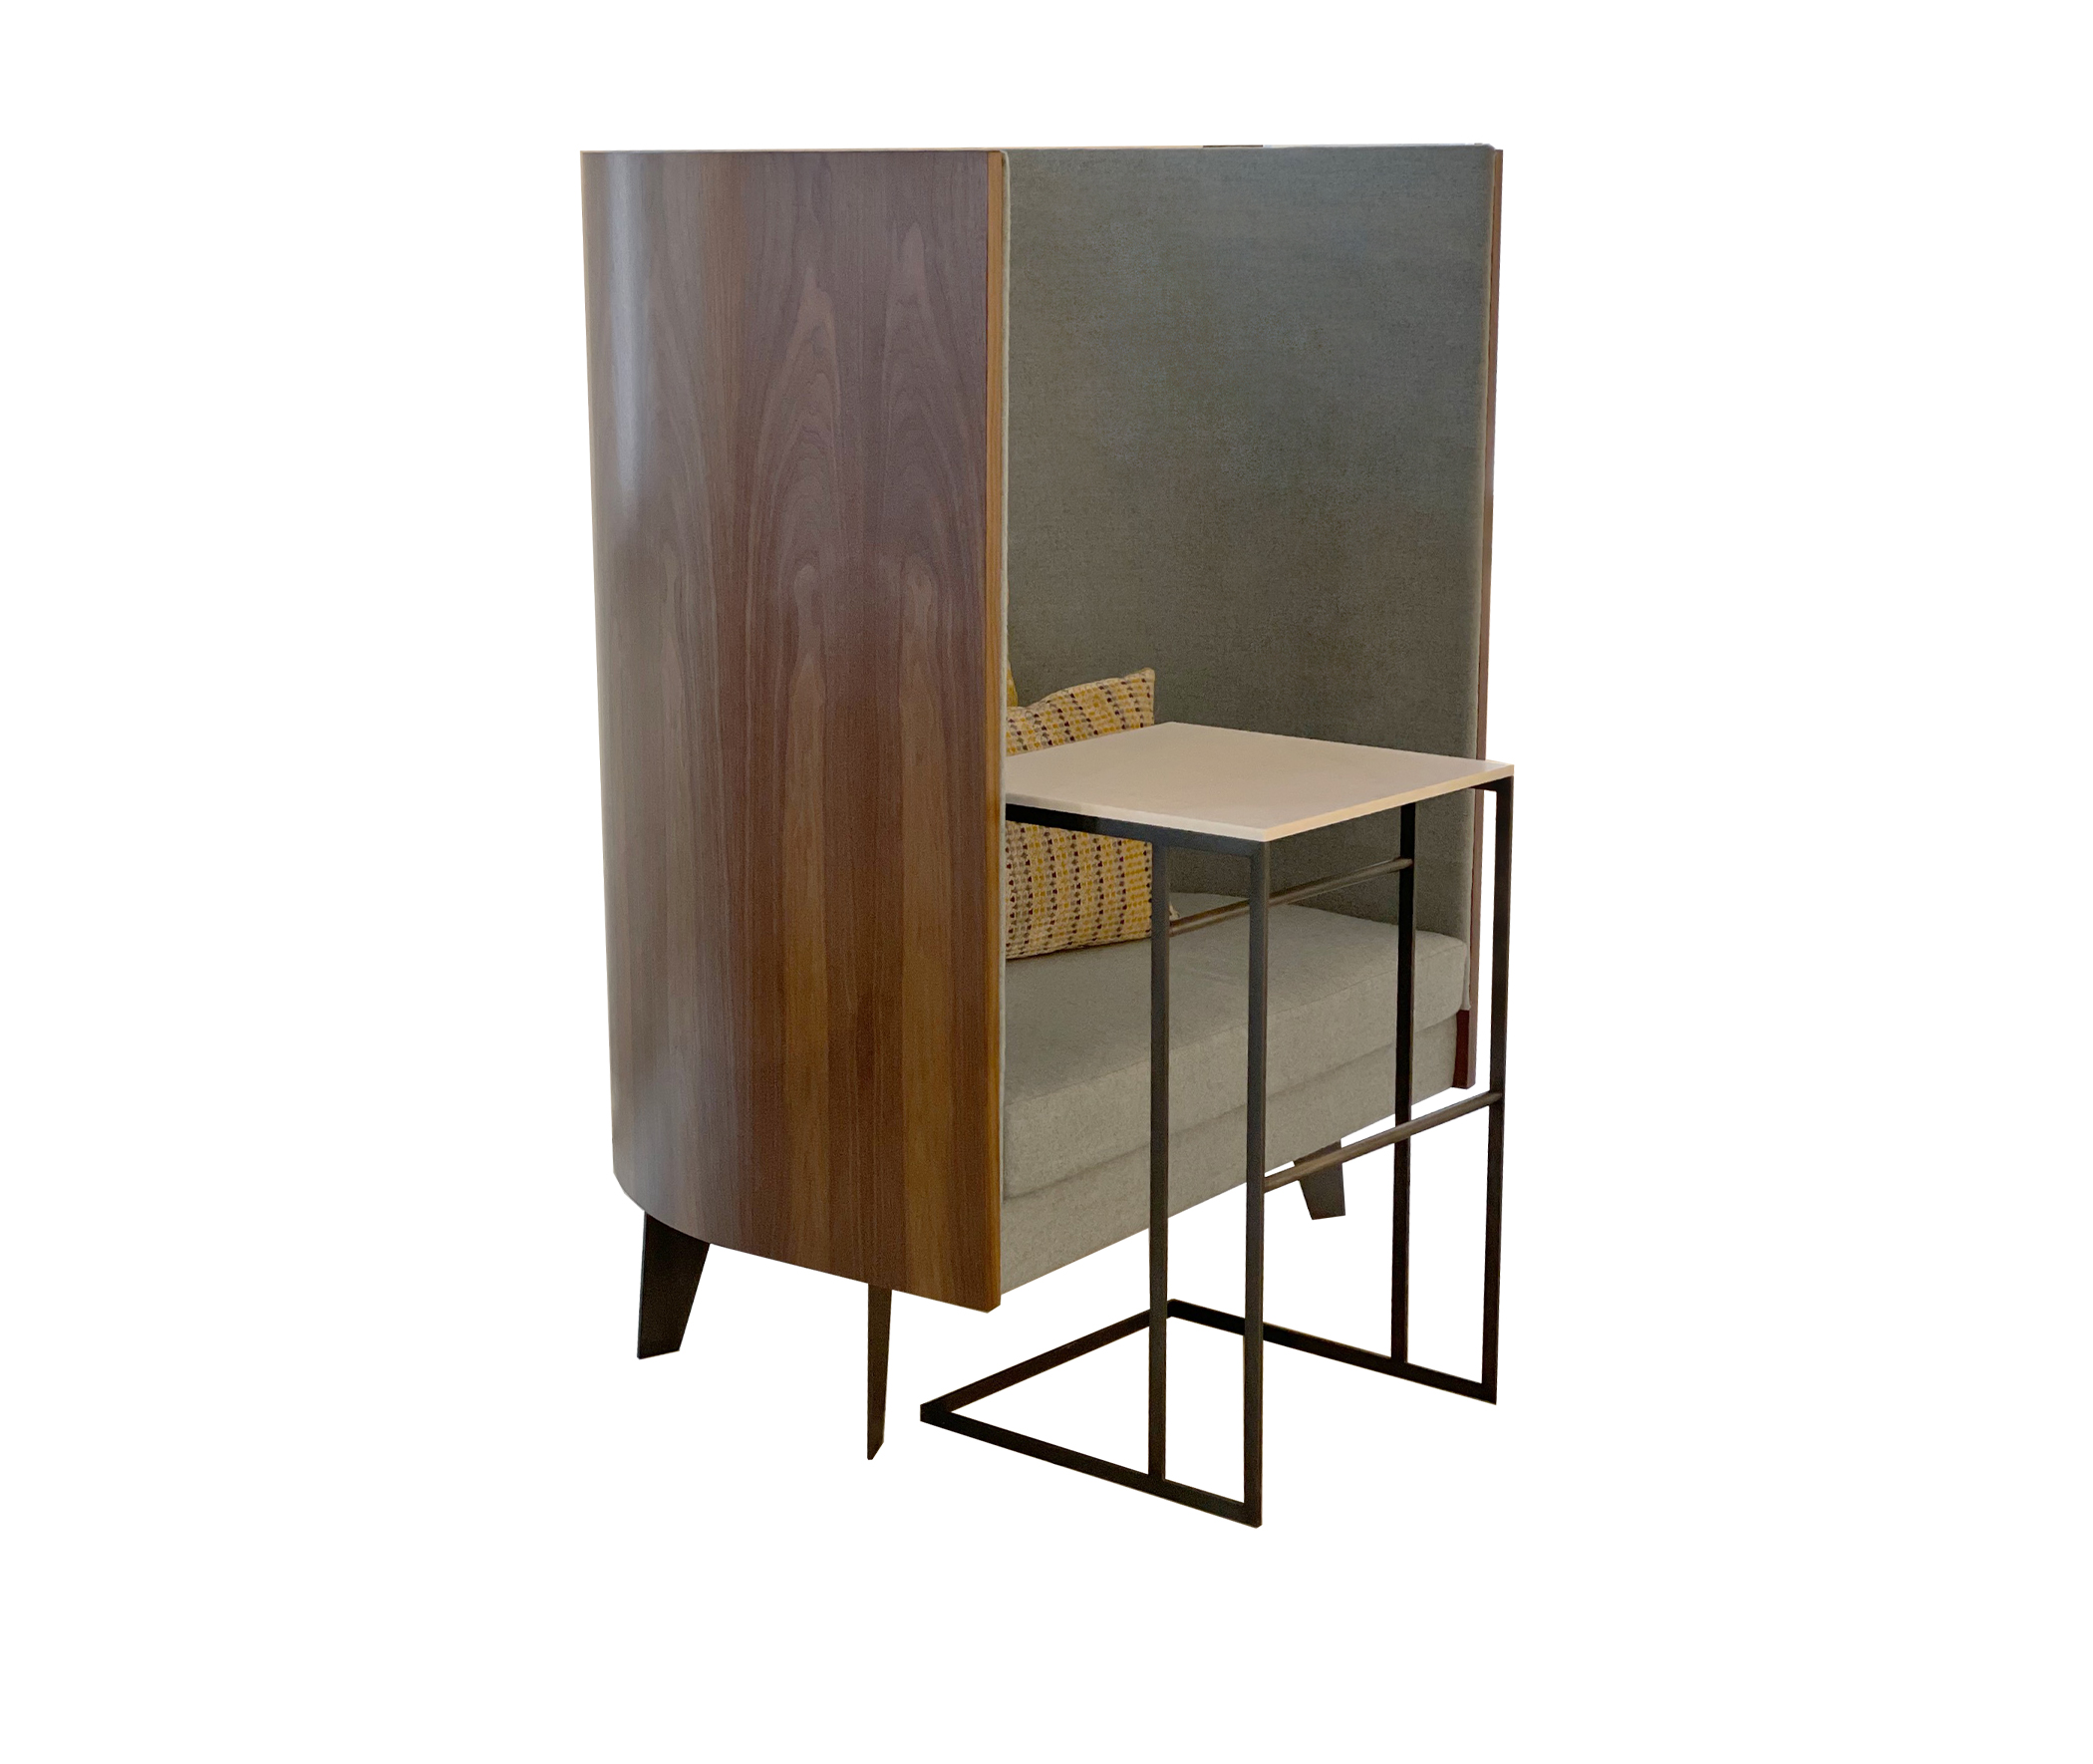 Arnold-Collective_CB15-Cove-Chair-and-table_int_products